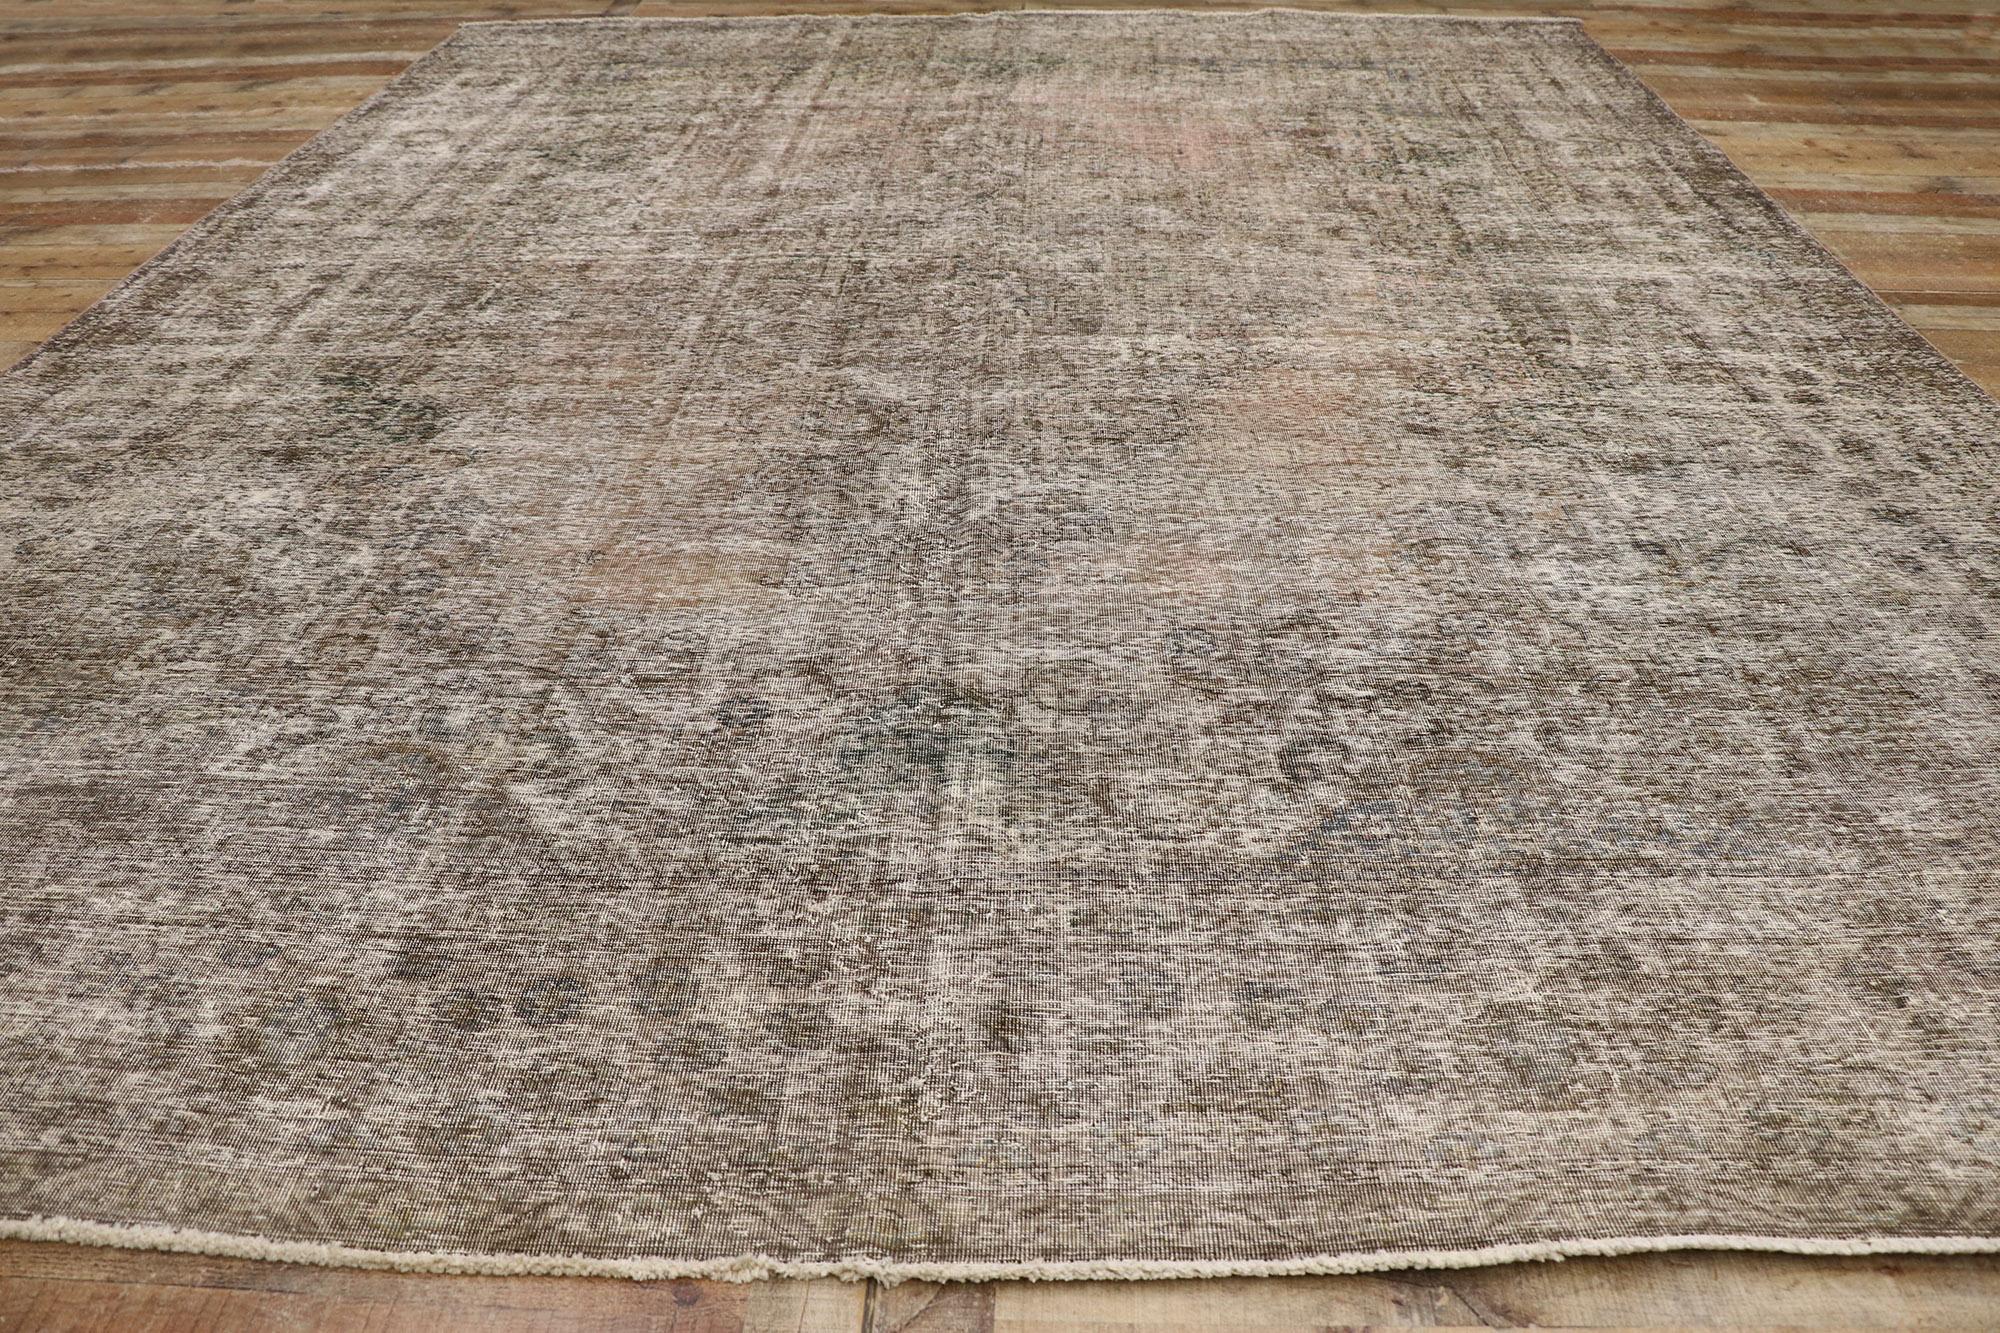 Distressed Vintage Persian Tabriz Rug with Rustic Farmhouse Chippendale Style 1